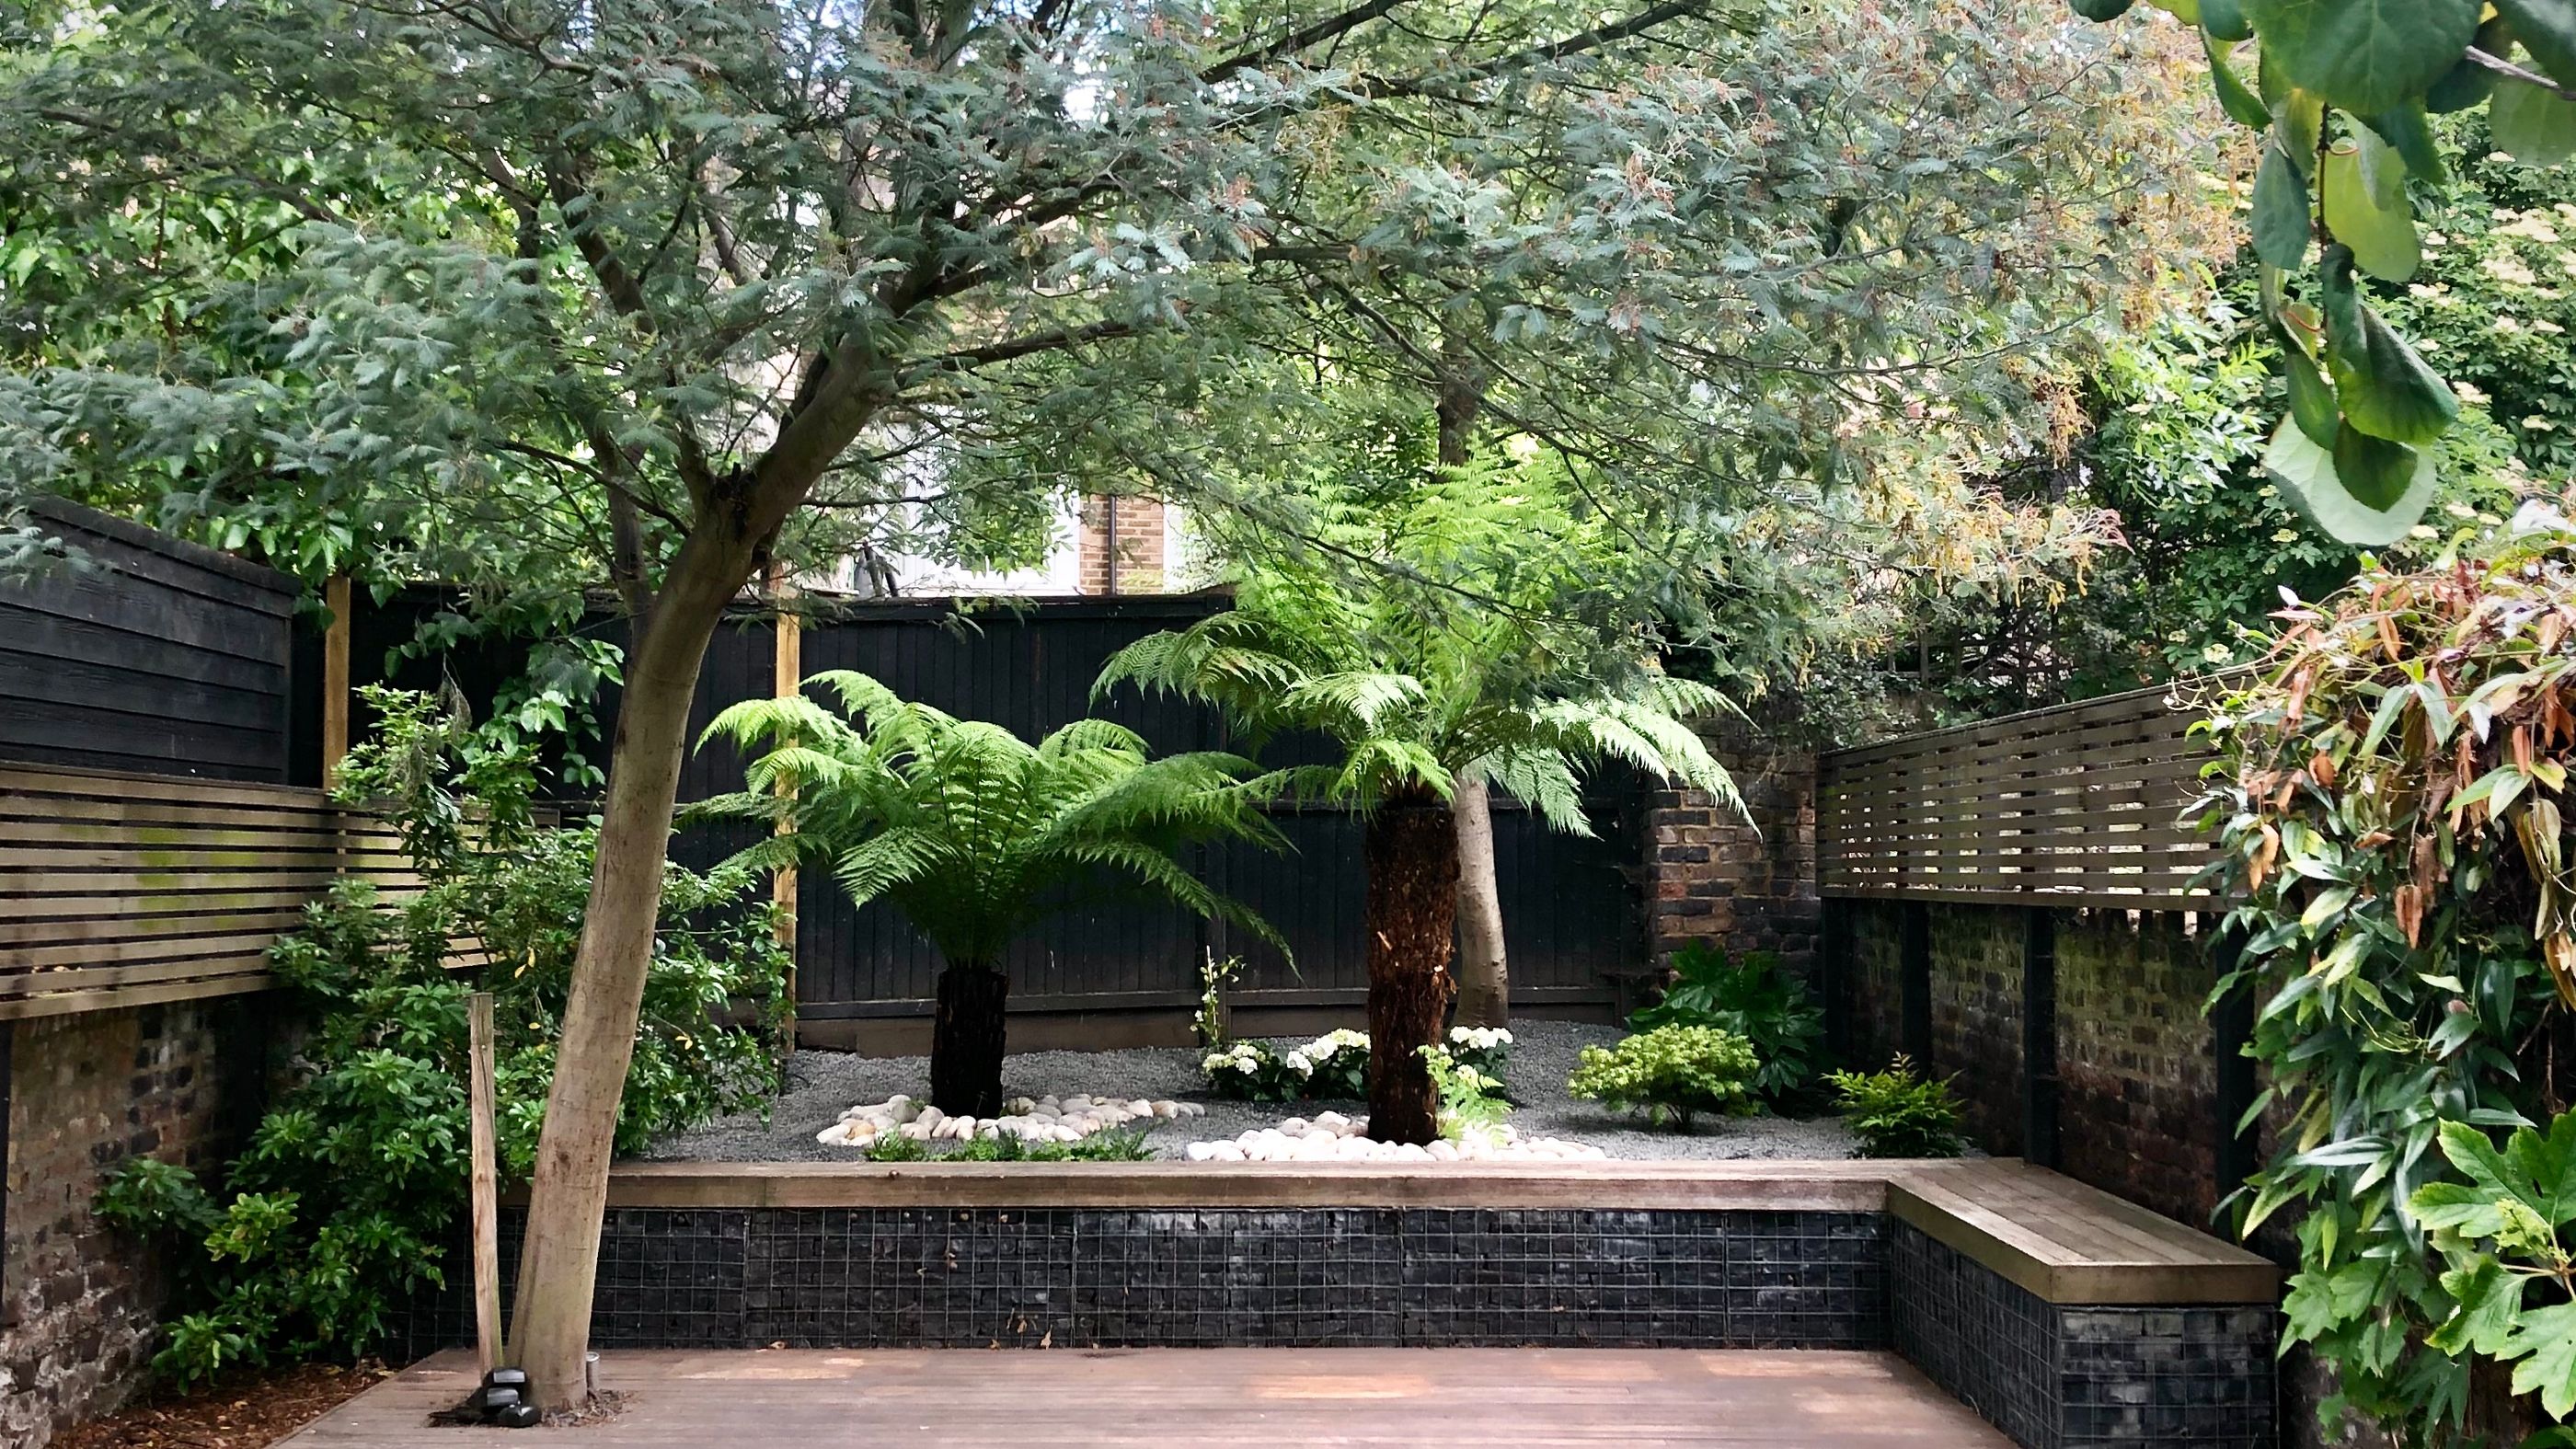 Garden Landscape Planting Design in North London Crouch End with Exotic Tree Ferns and Lush Greenery